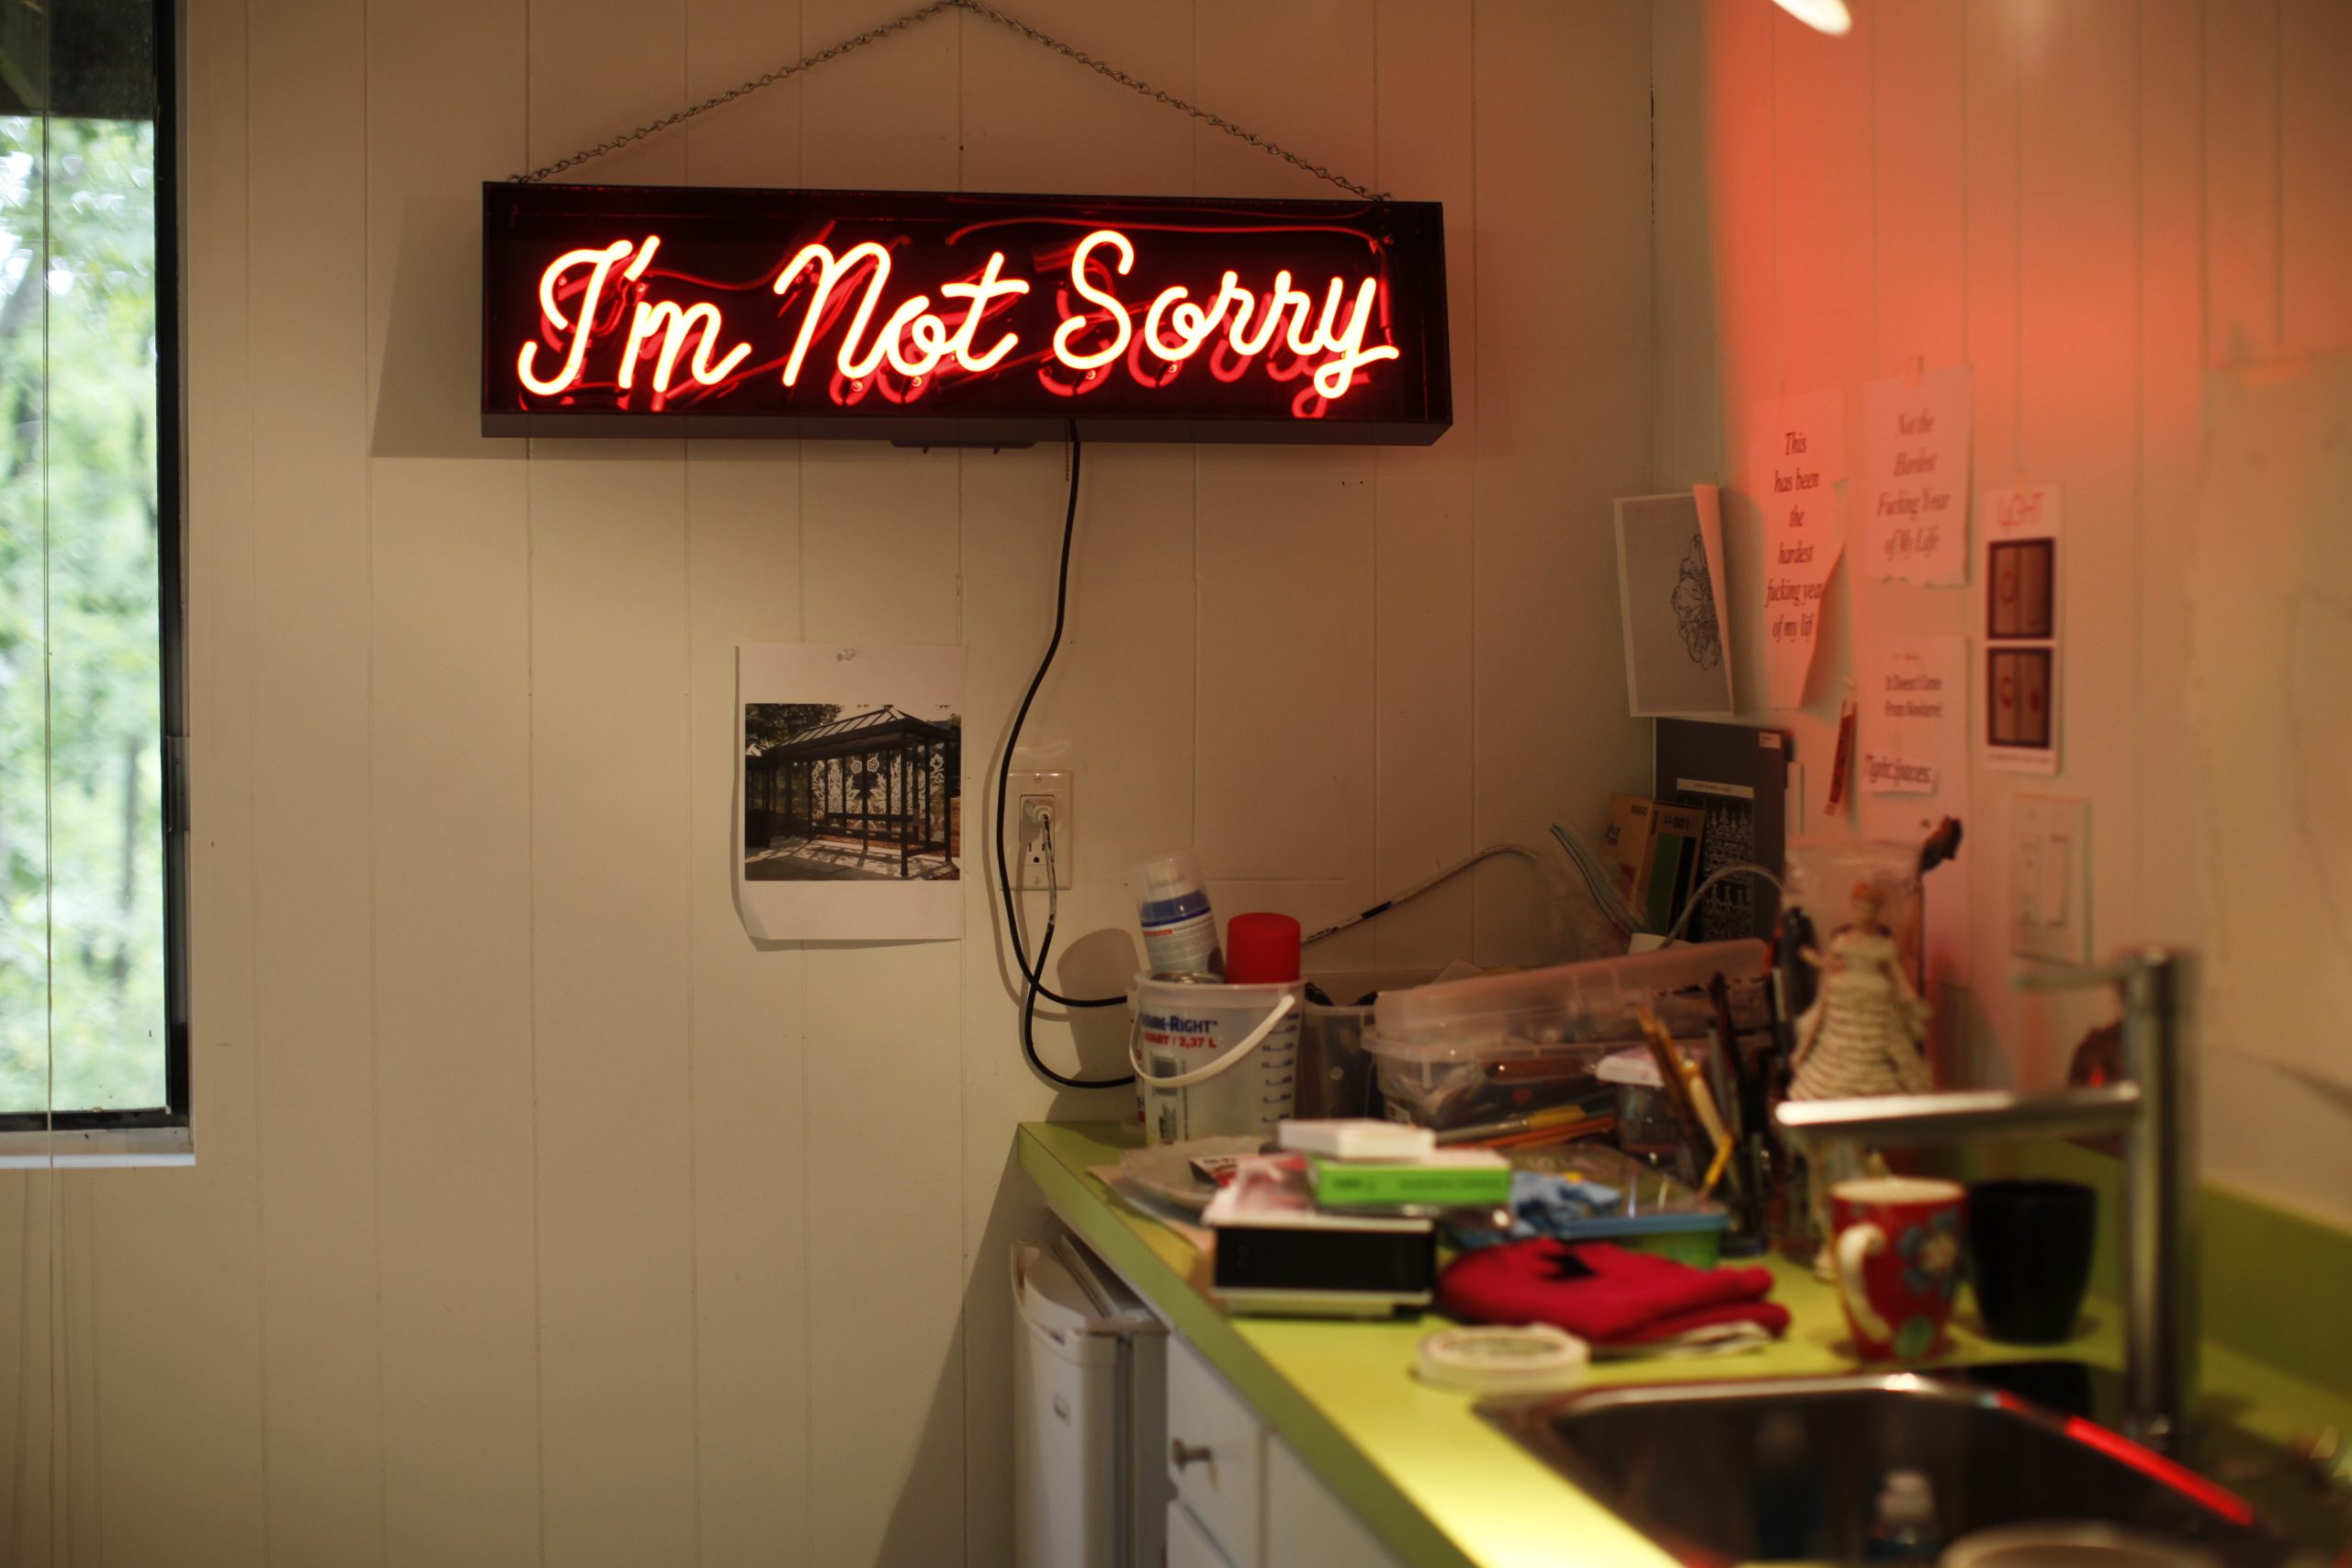 Photograph of Susan Harbage Page's studio with mess on a countertop and a neon sign that says "I'm Not Sorry"